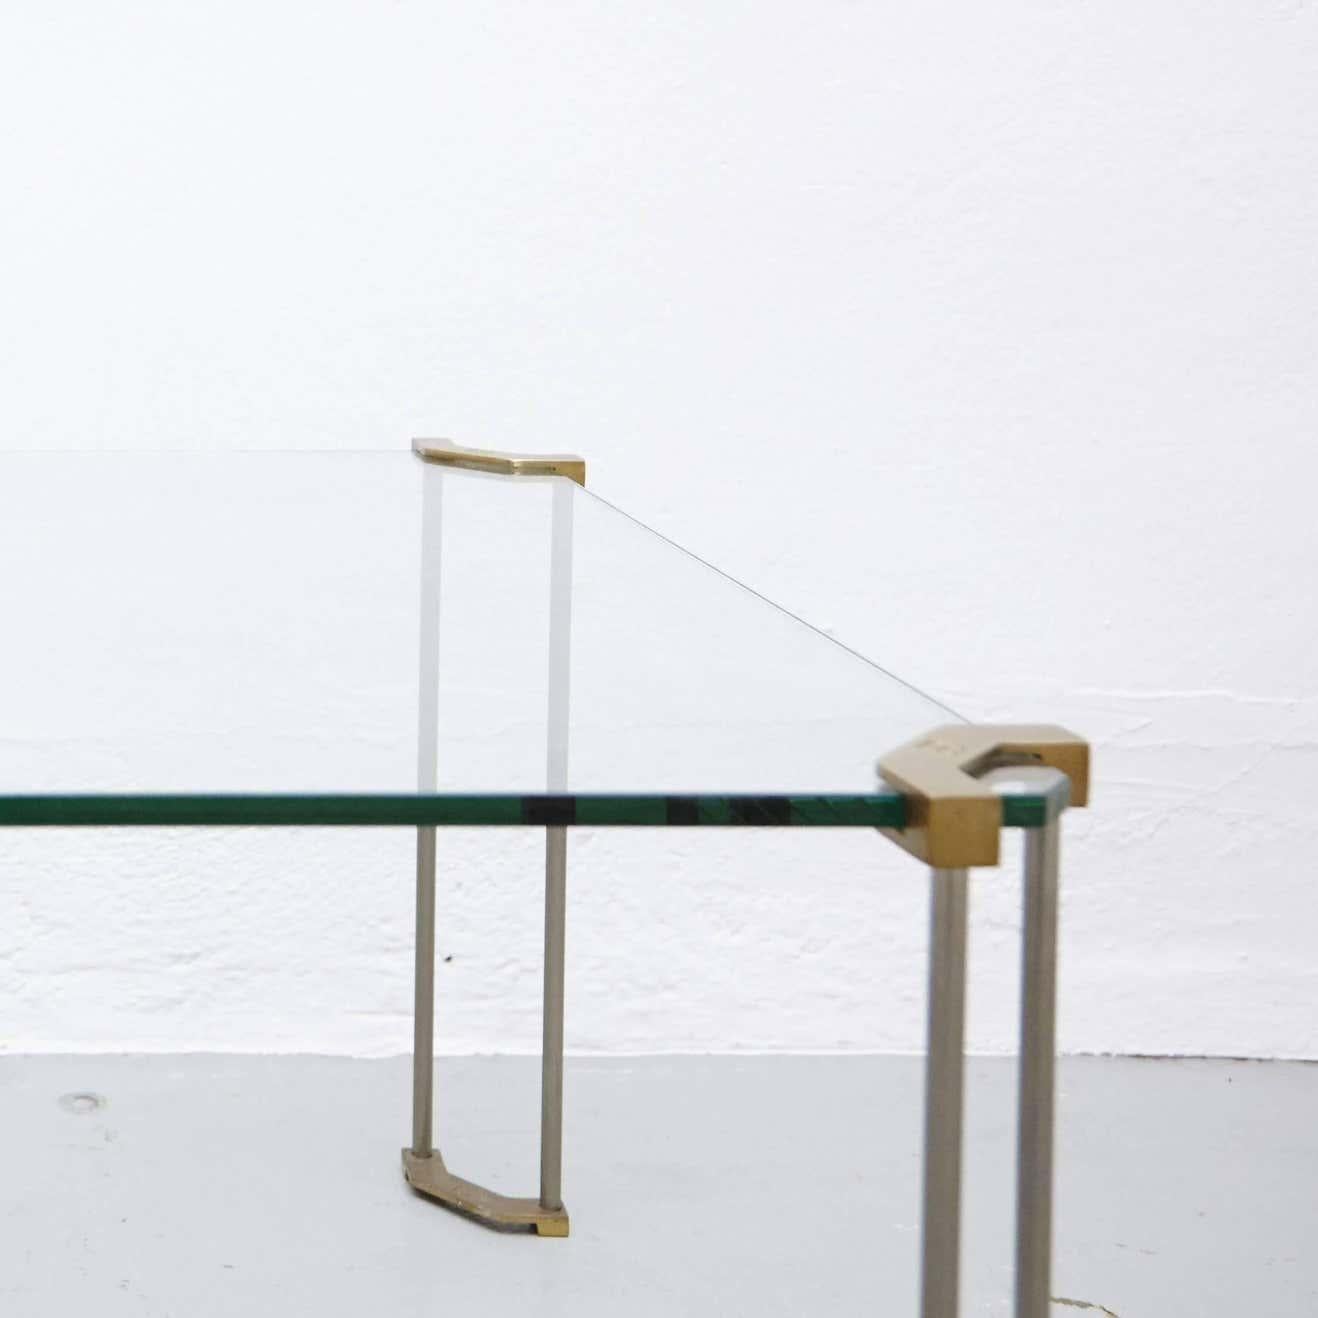 The table is made from glass and sand casted brass. The legs are hand casted by very skilled craftsmen in the Netherlands. The brass has typical characteristics of the casting process and only some parts are polished.

After the Hungarian revolution